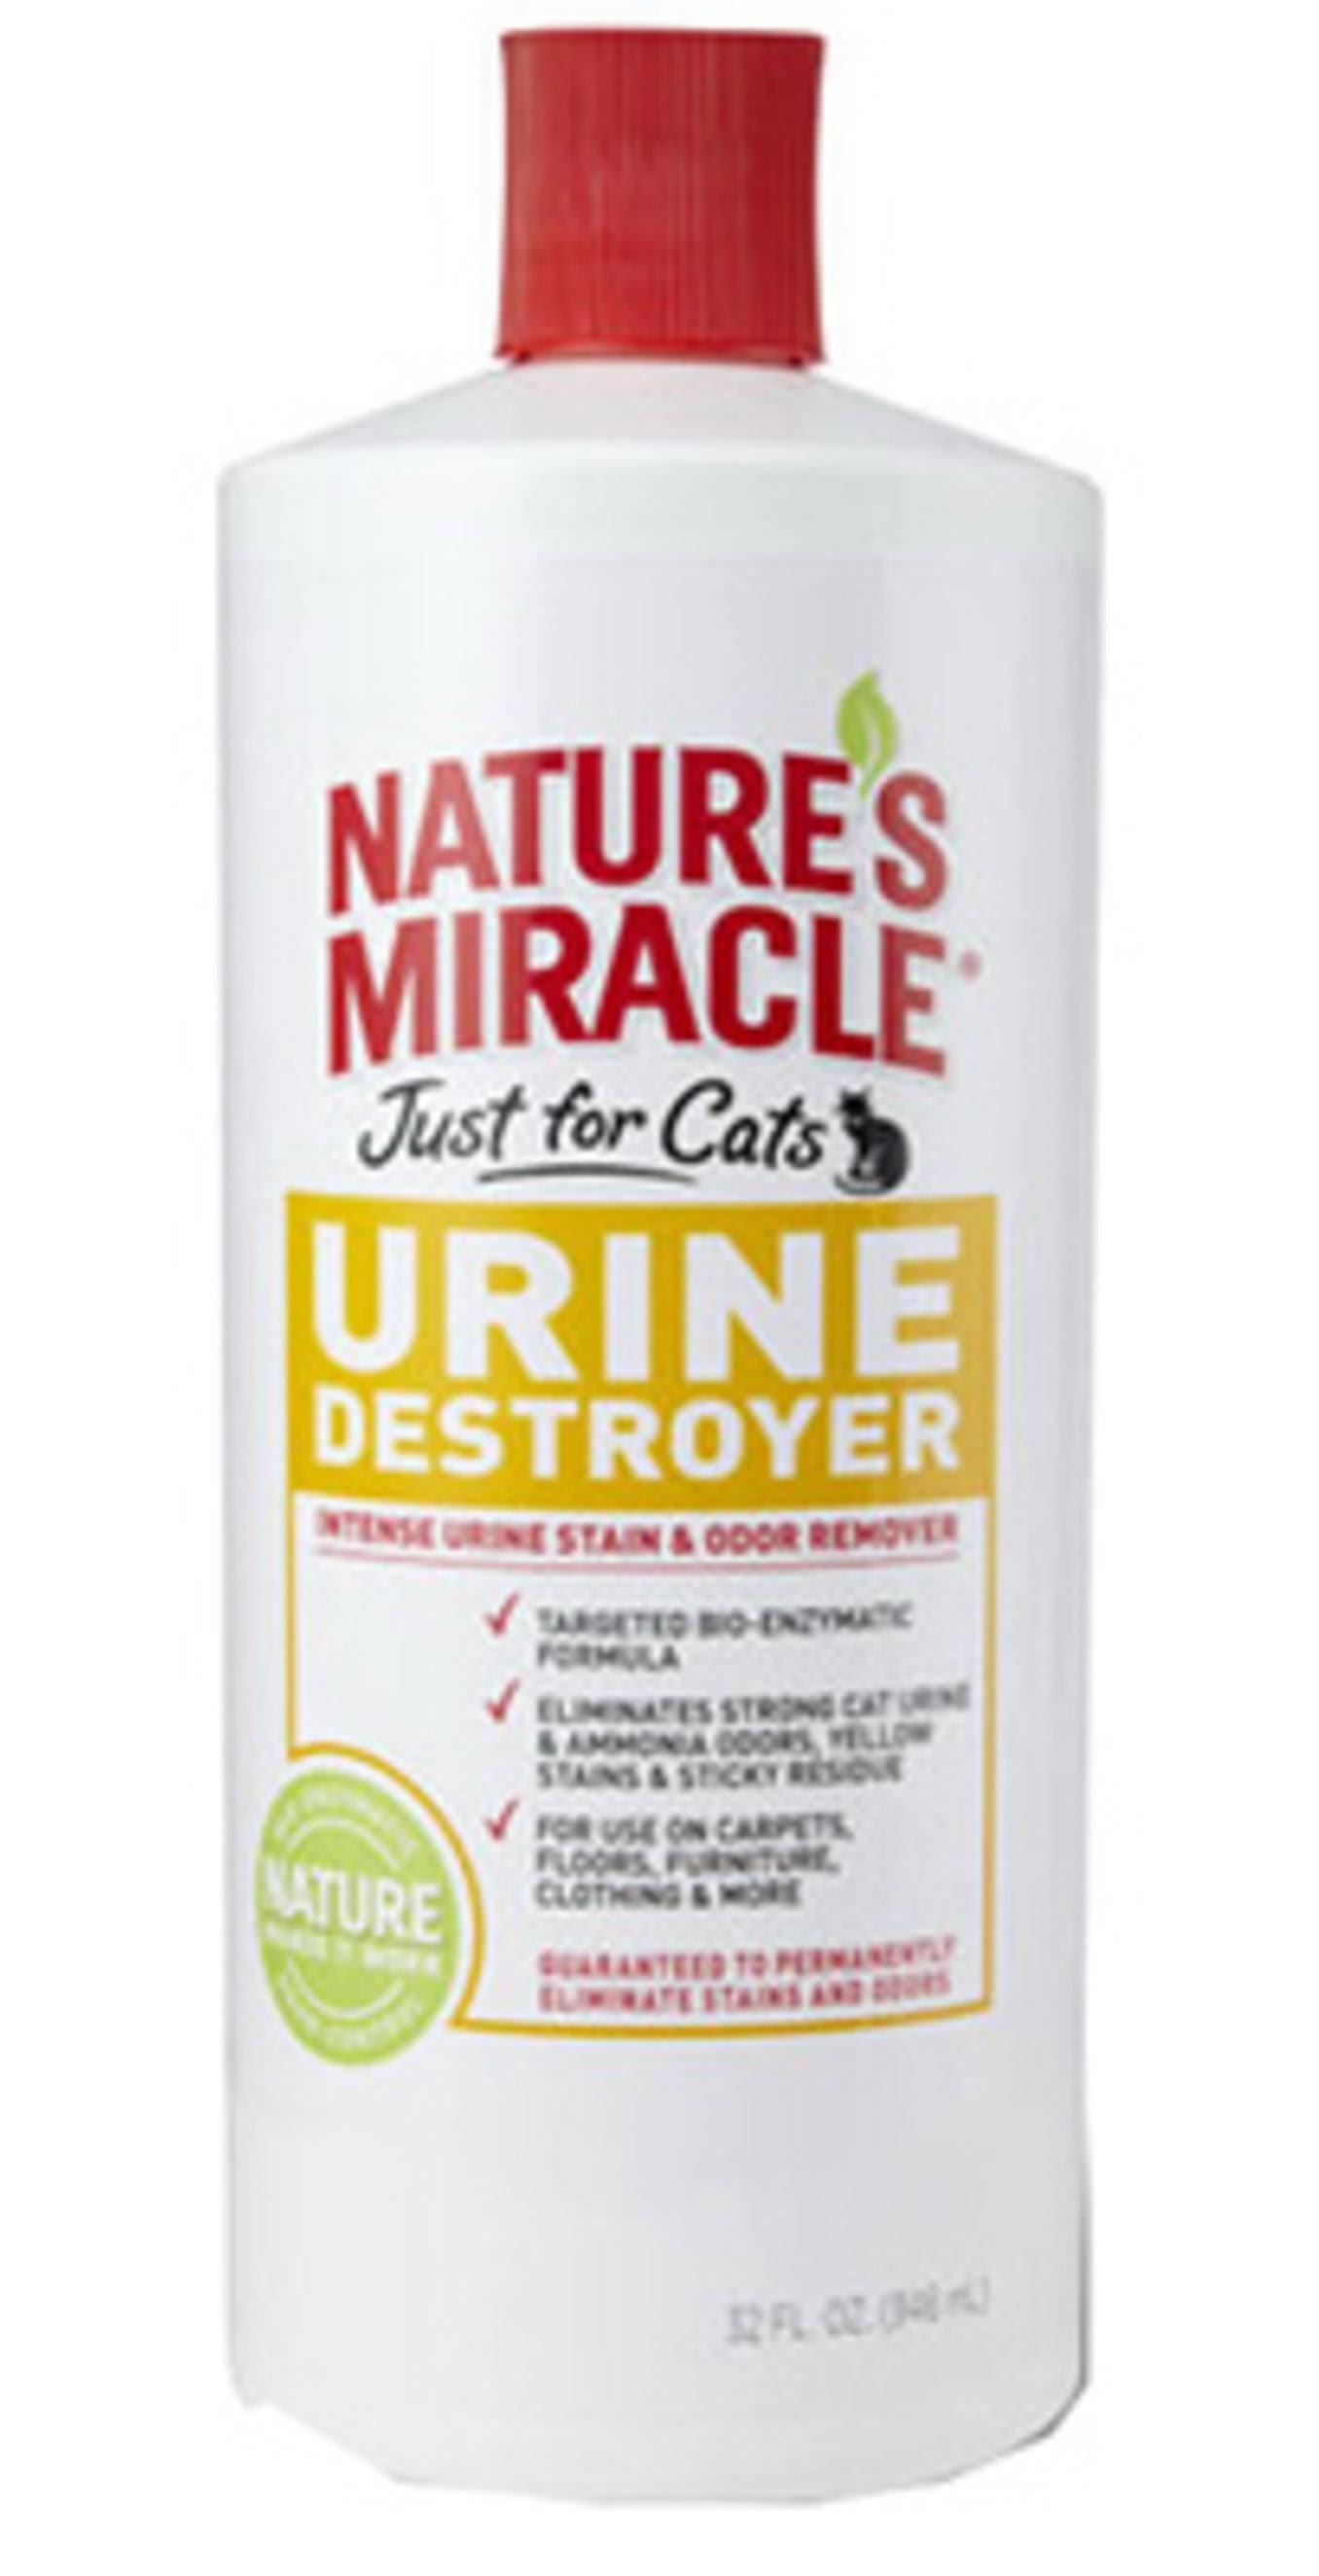 Nature's Miracle Just for Cats Urine Destroyer 32 oz